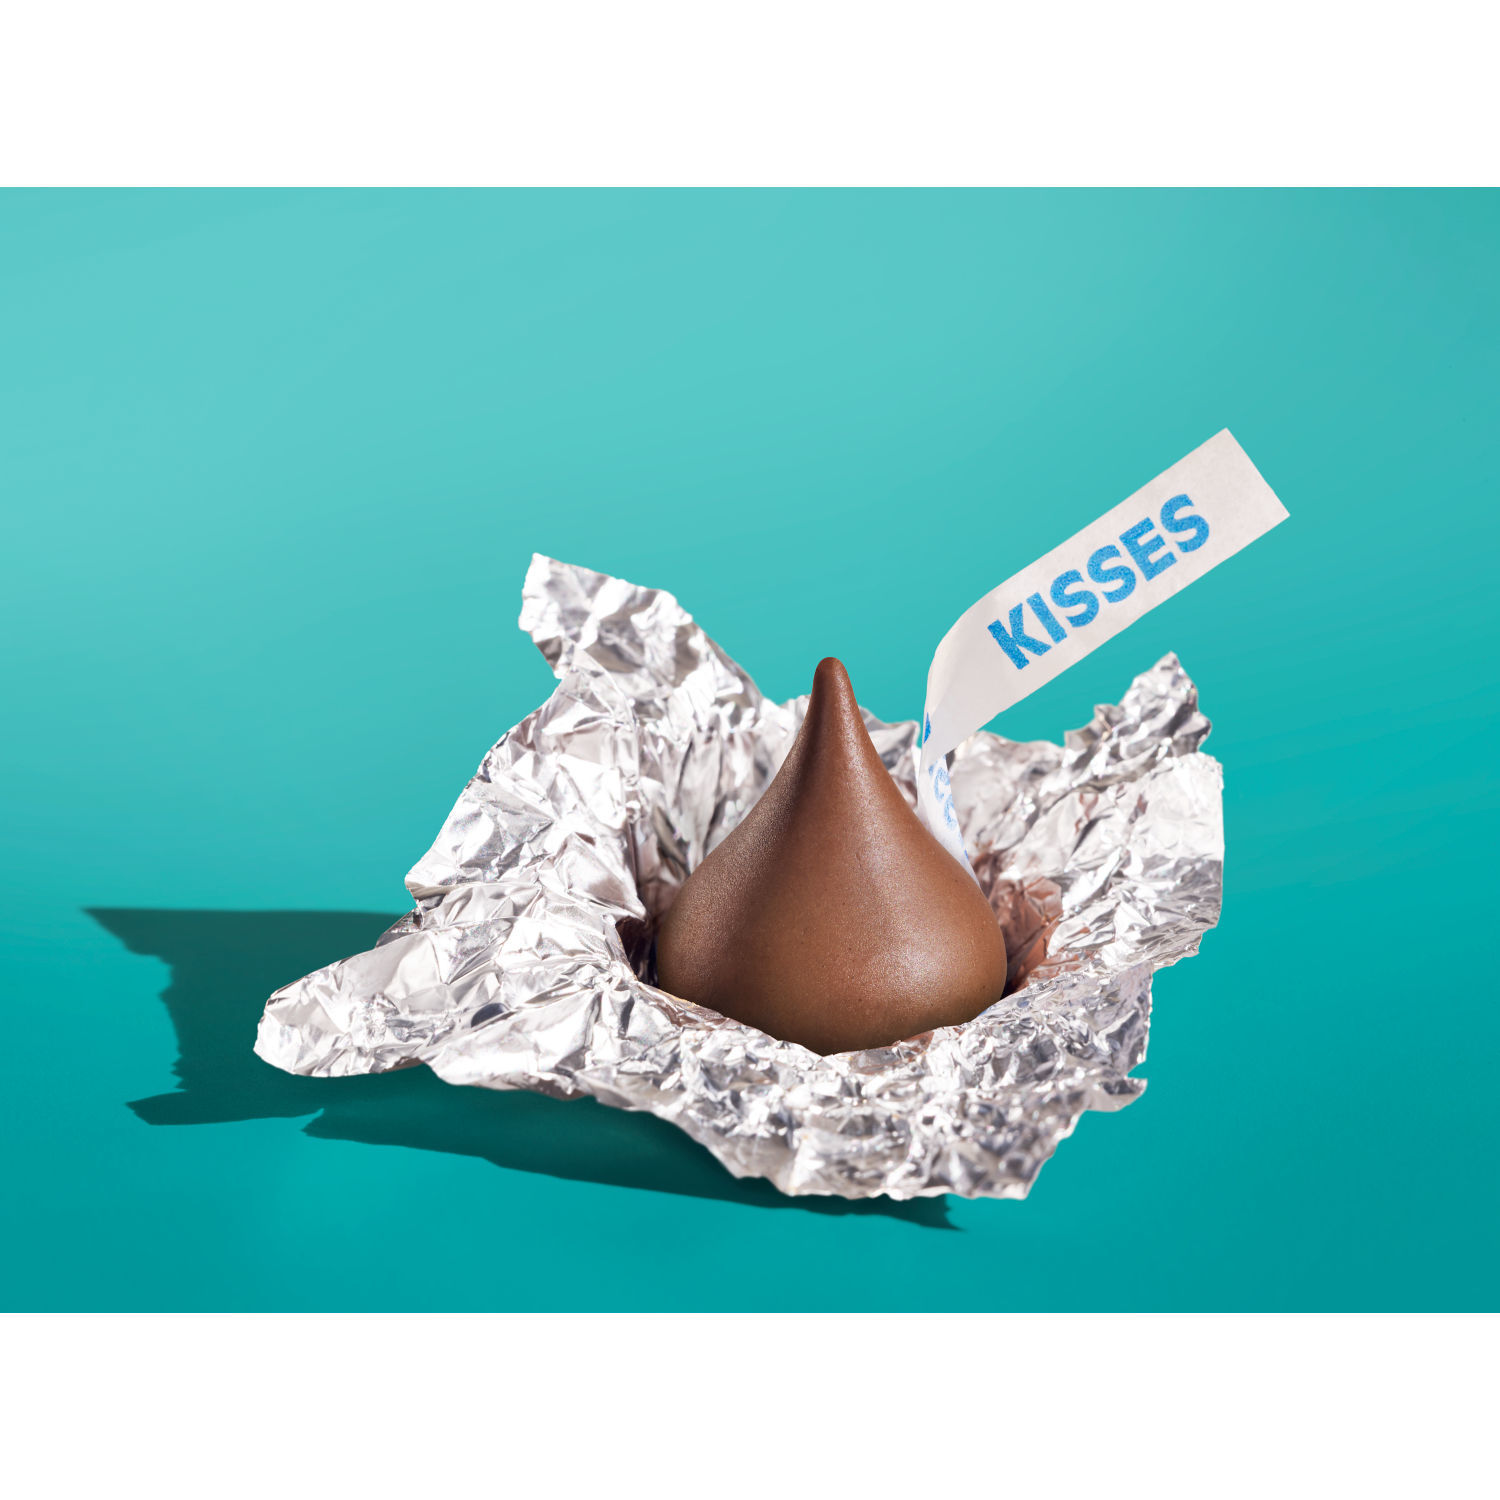 Hershey's Kisses Milk Chocolate Candy, Family Pack 17.9 oz - image 4 of 9